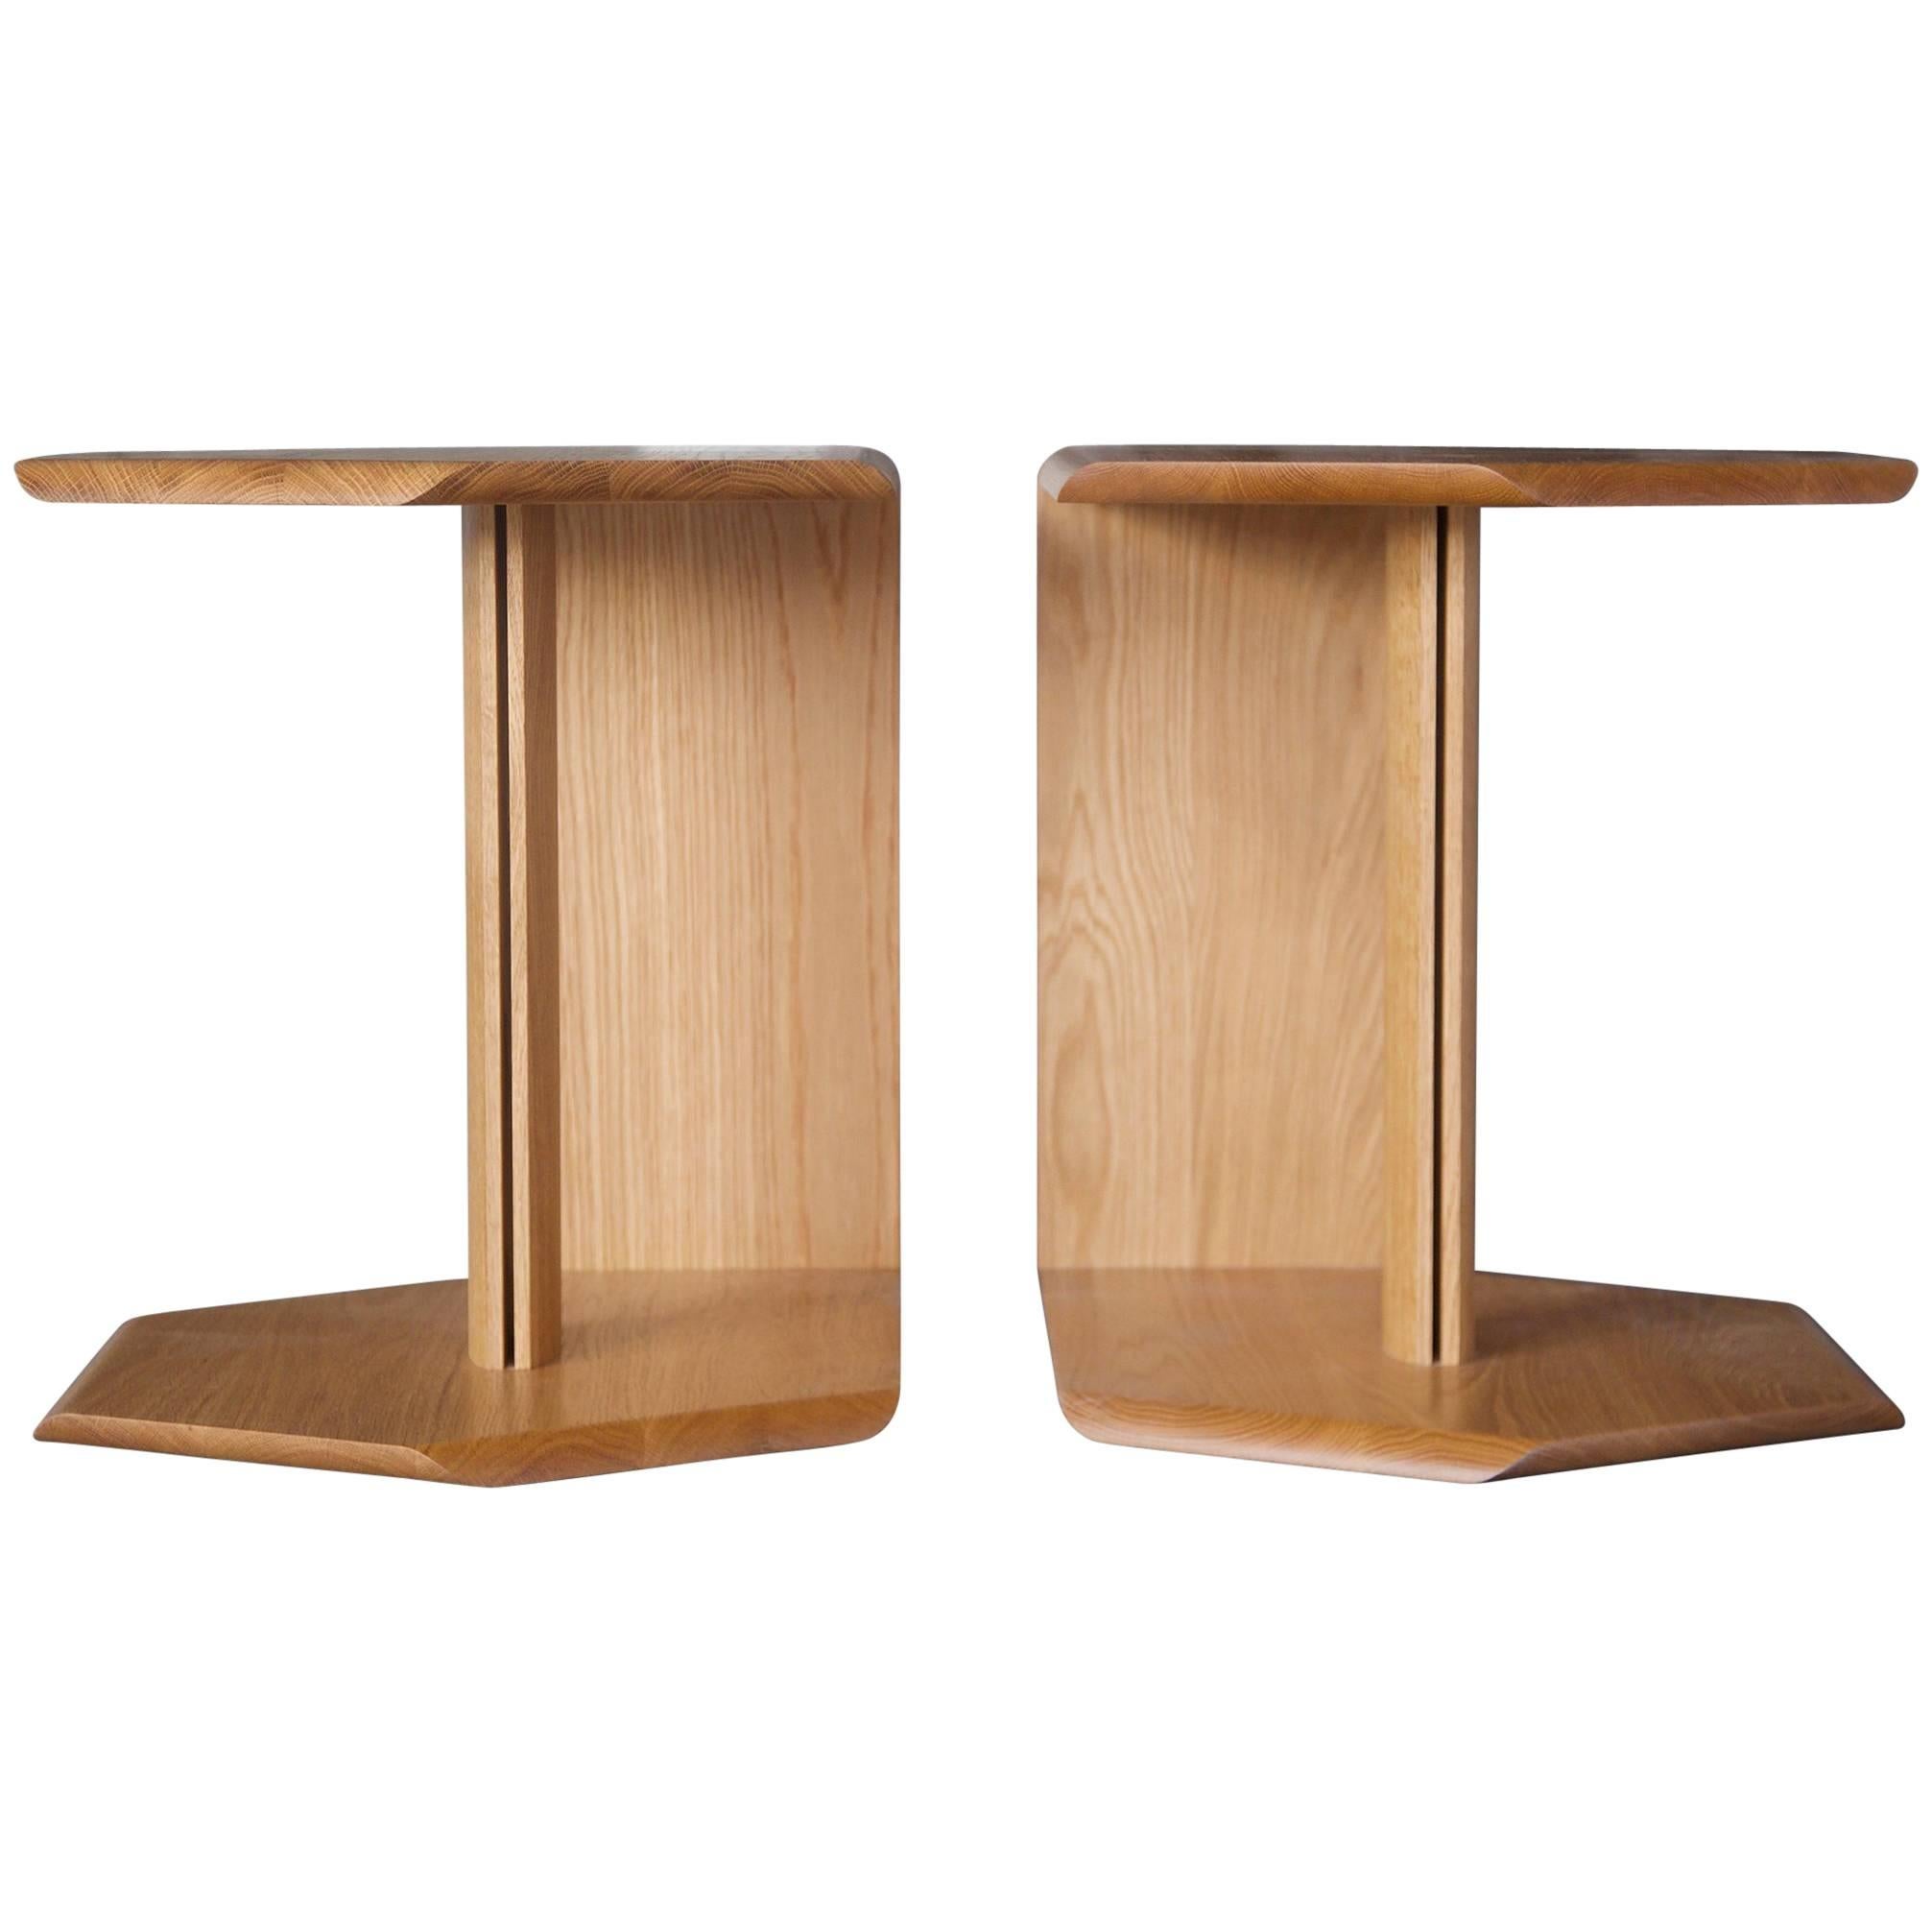 Geometric Solid Wood Reflecting Side Tables by BELLBOY For Sale